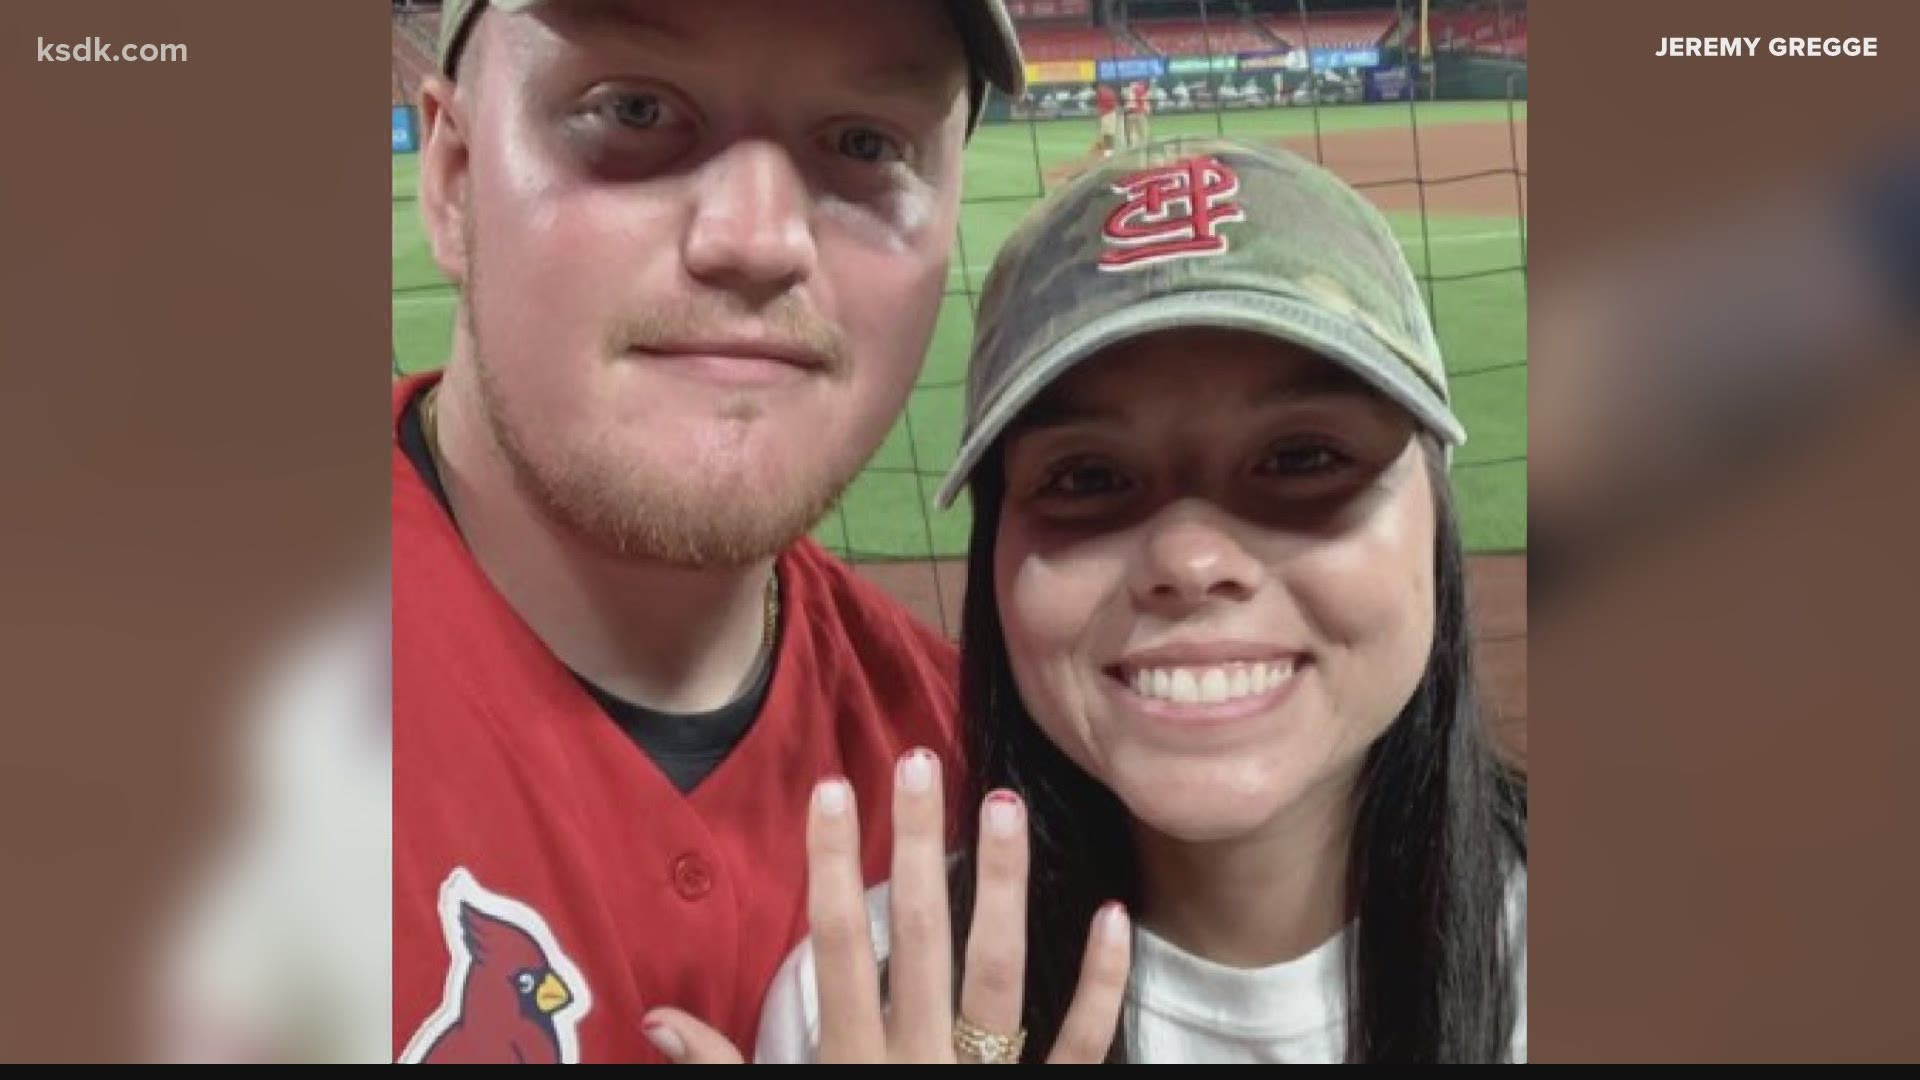 This couple didn't just get engaged at Busch Stadium Saturday night. Thanks to Yadier Molina and company, they got a one-of-a-kind memory for a lifetime